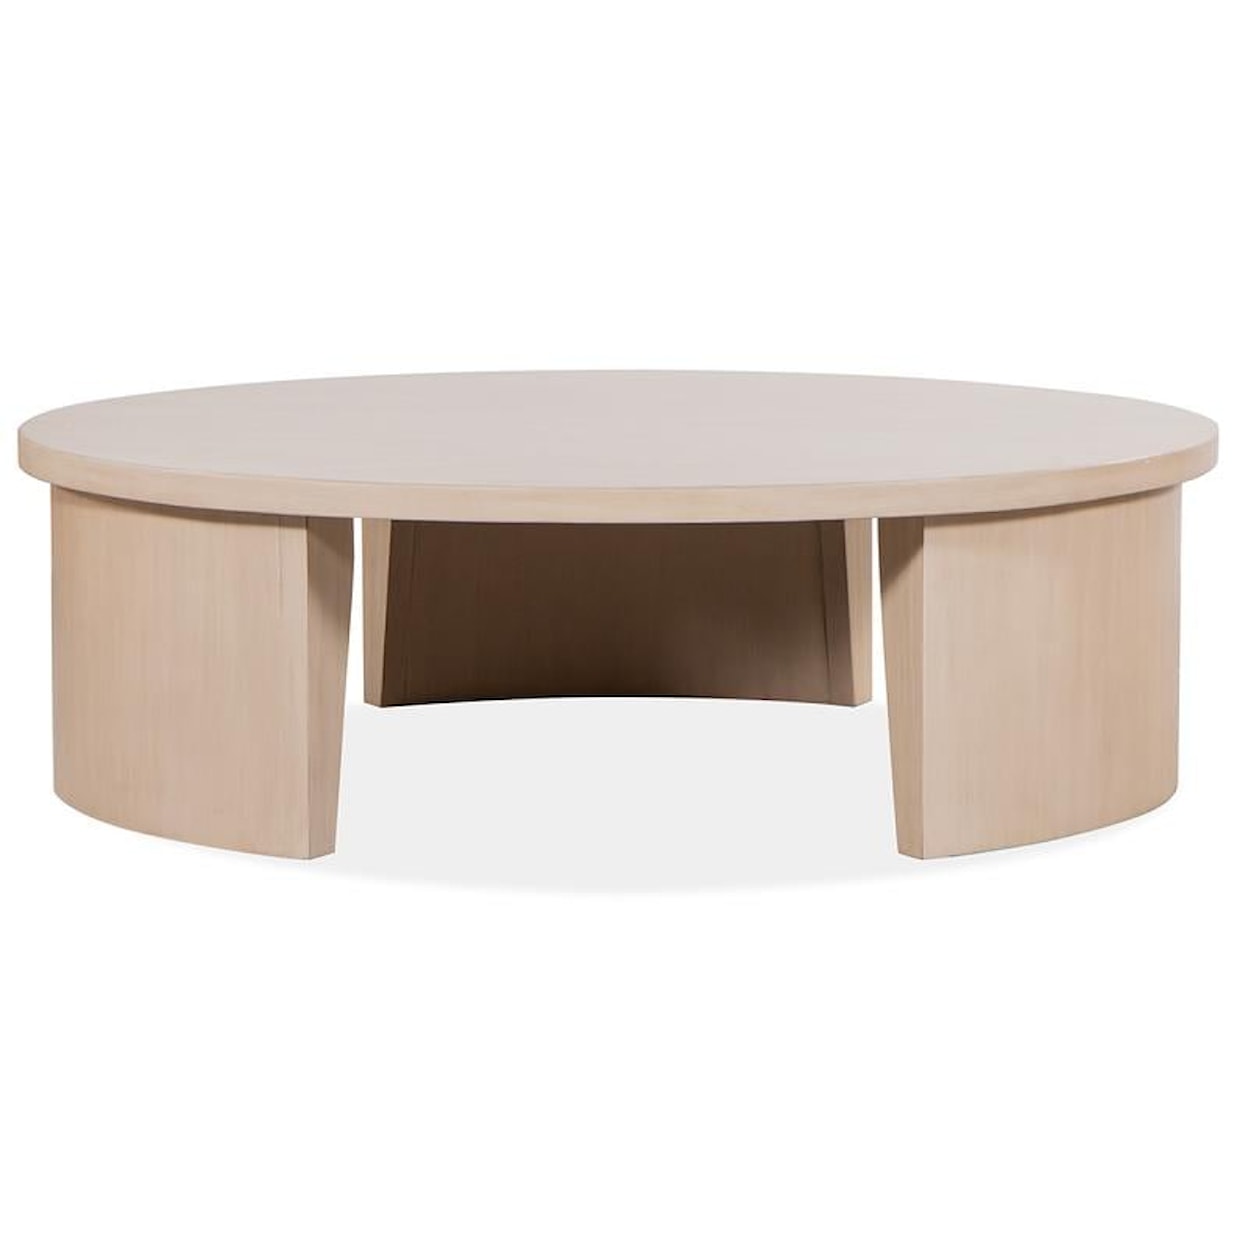 Magnussen Home Mosaic - A6123 Round Accent Cocktail Table